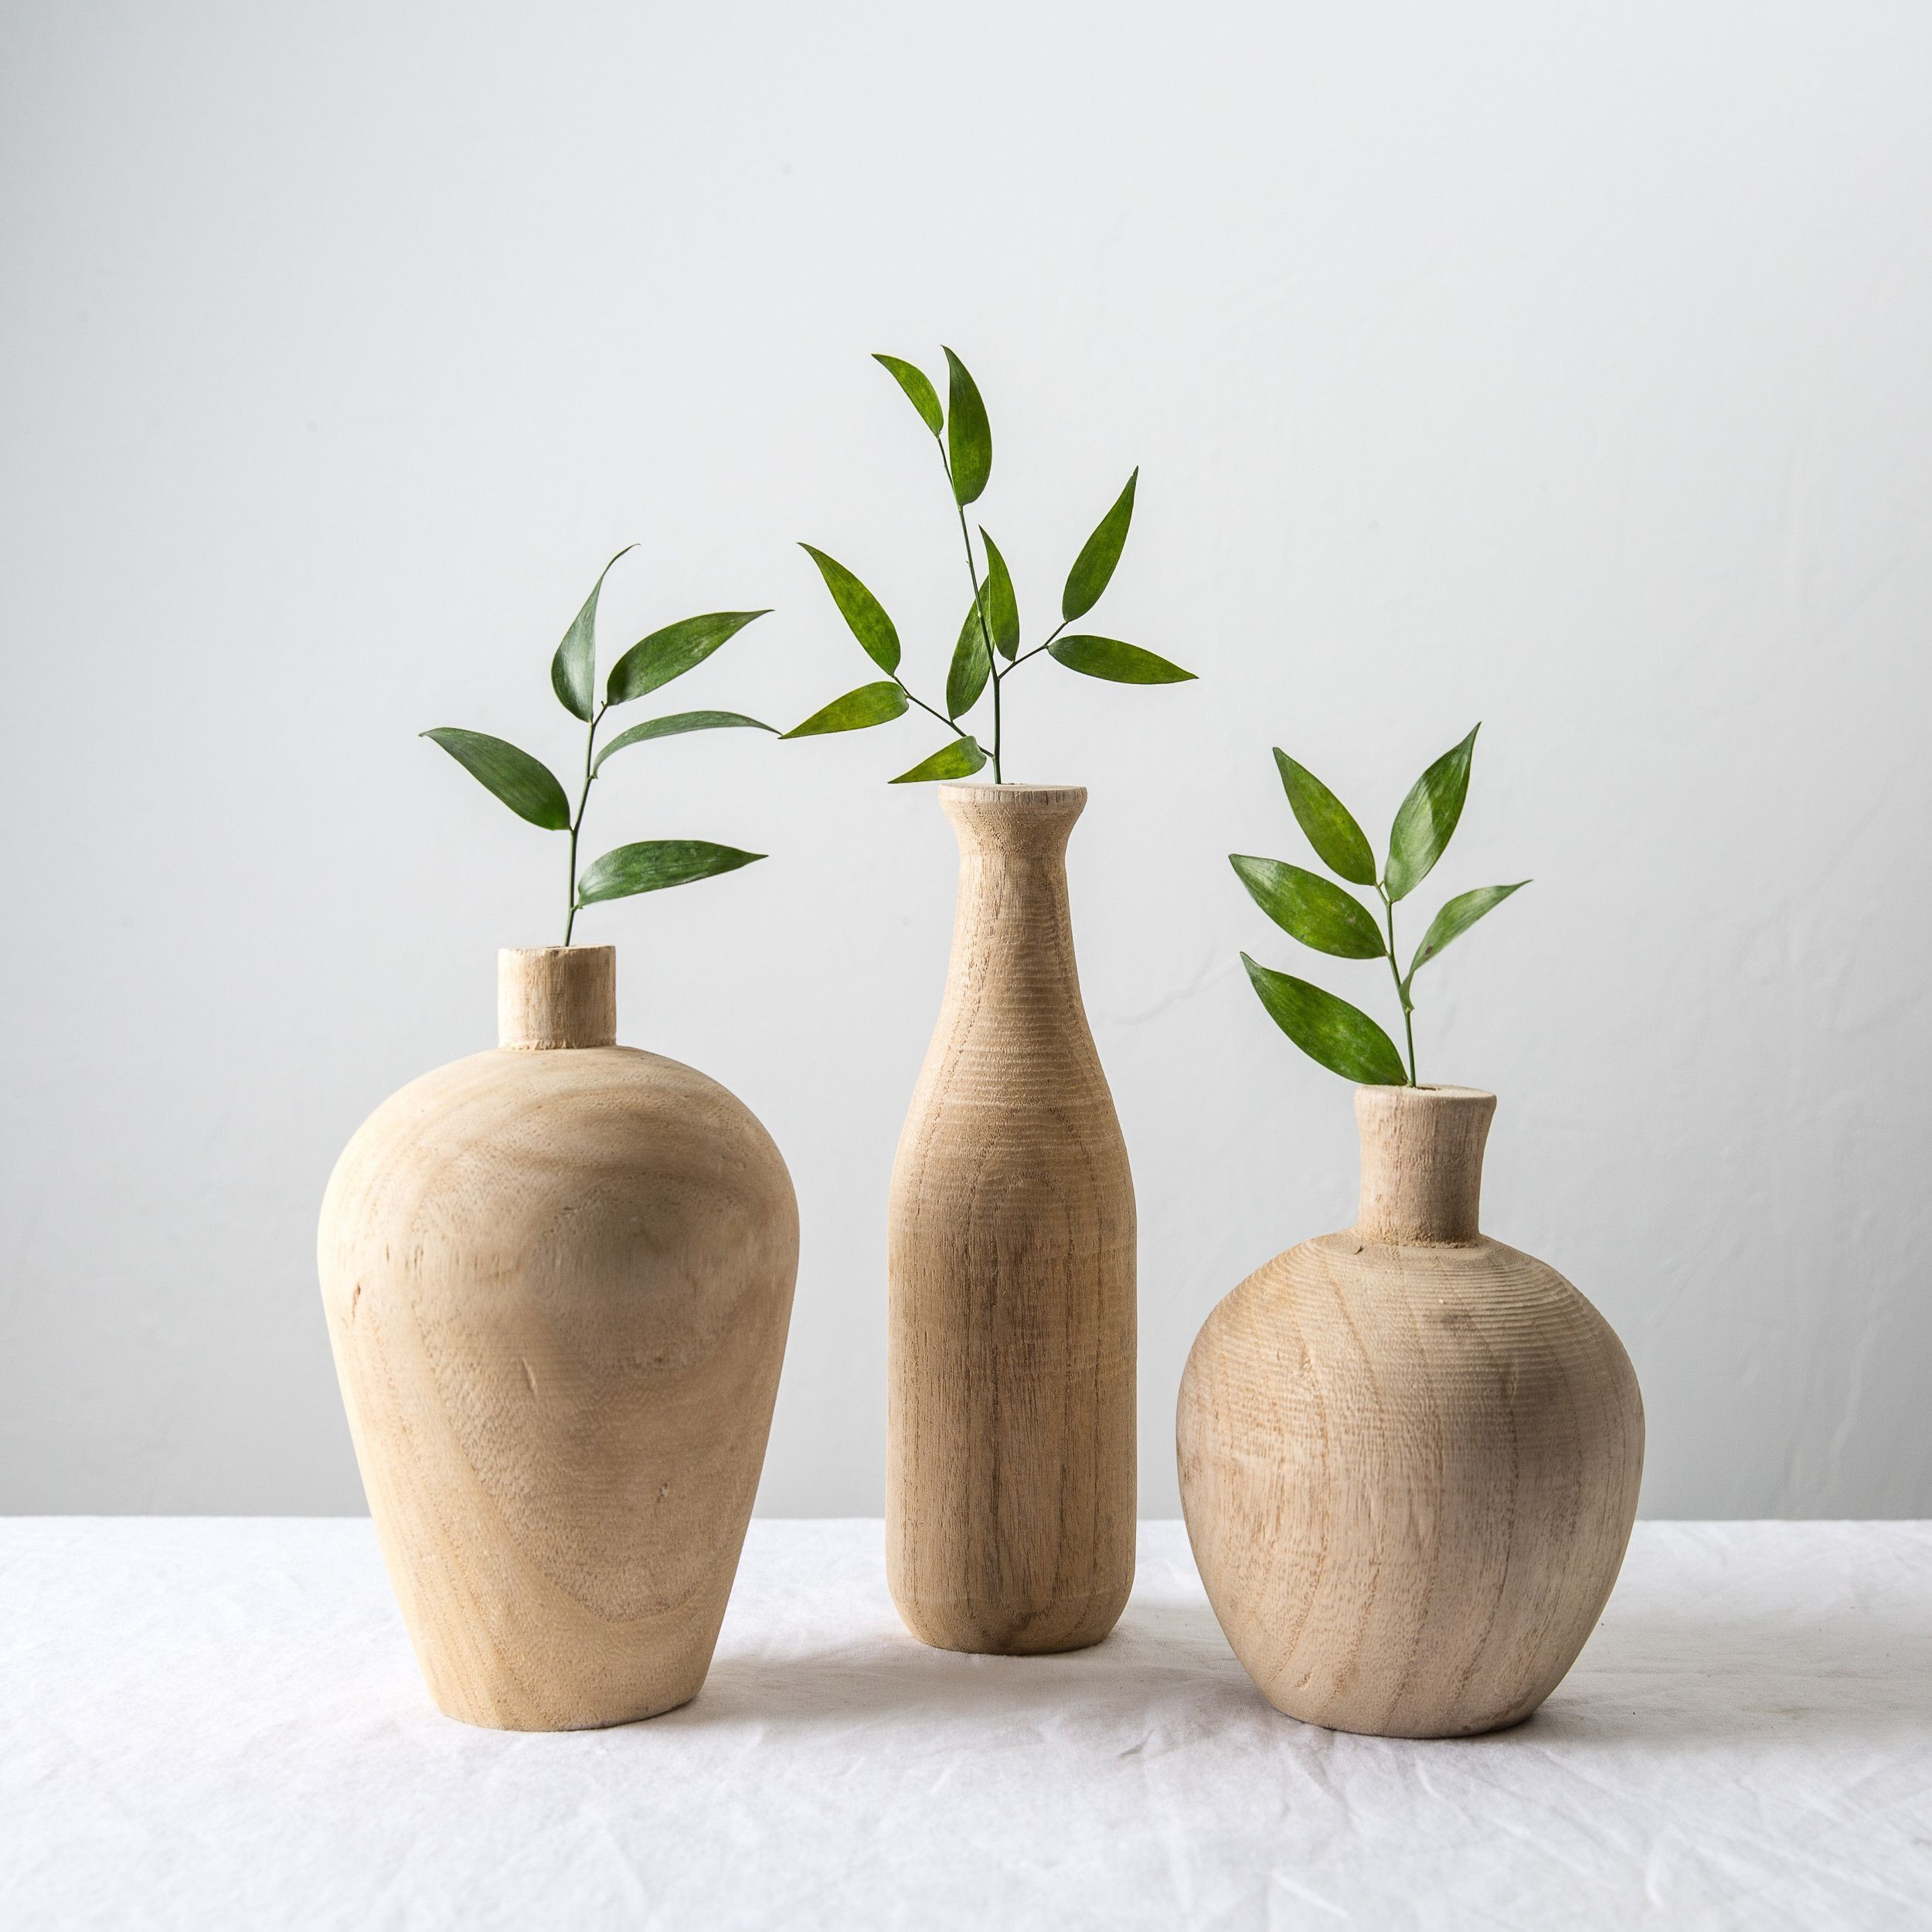 15 attractive Wooden Vases and Bowls 2024 free download wooden vases and bowls of tall wooden vases fresh 39 elegant wood vases for centerpieces the for tall wooden vases fresh 39 elegant wood vases for centerpieces